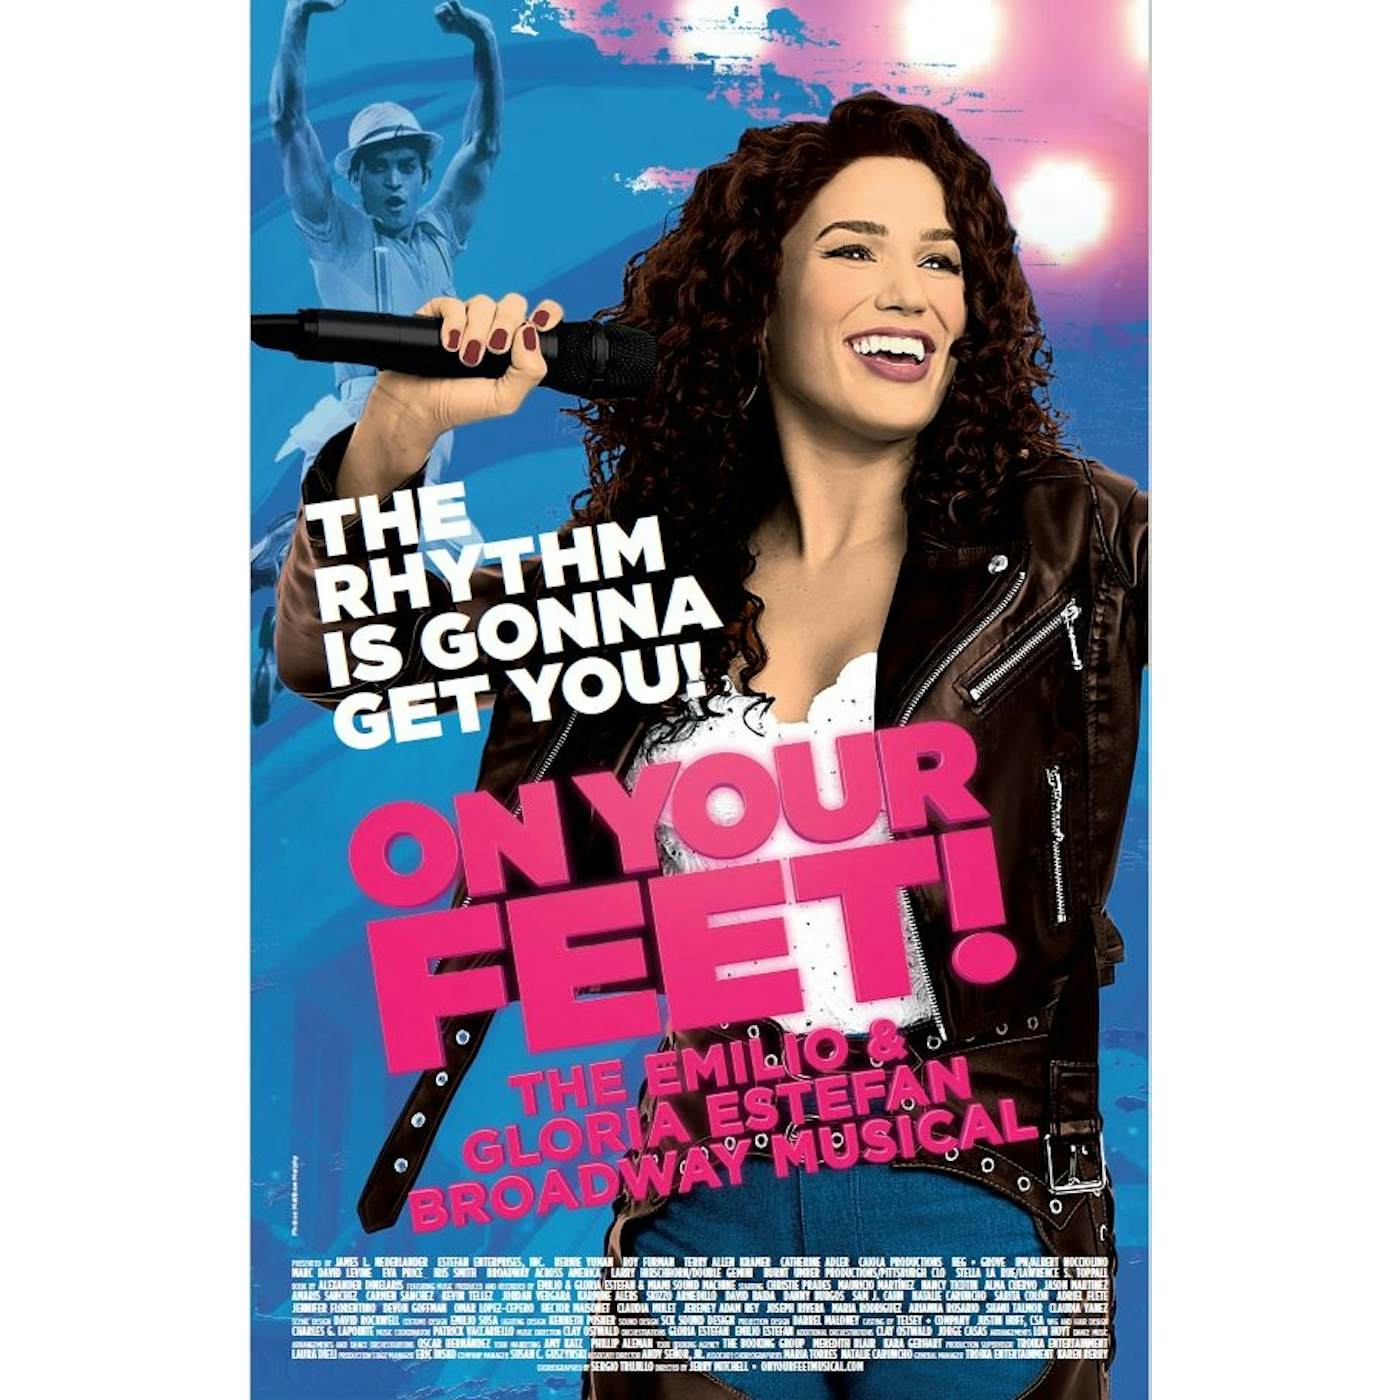 ON YOUR FEET: THE STORY OF EMILIO & GLORIA On Your Feet Windowcard Poster